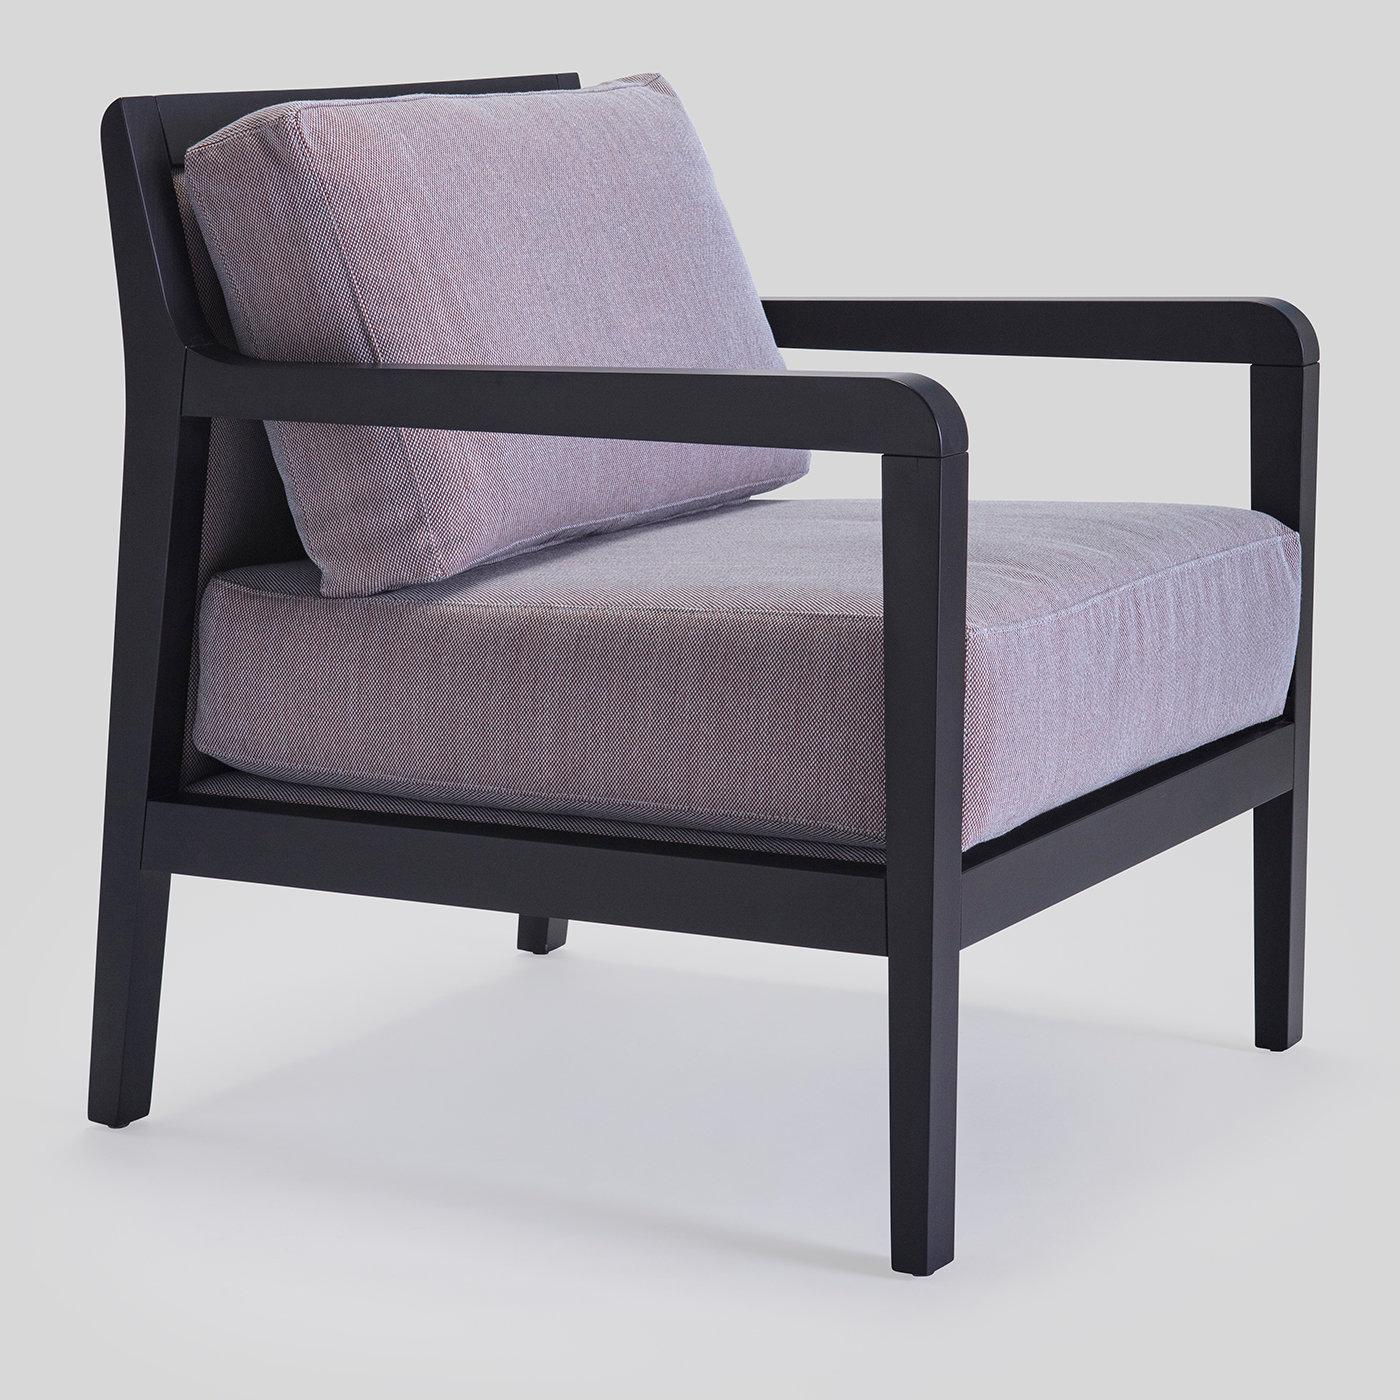 A clean and essential design of modern sophistication, this lounge armchair will exquisitely complement both public or private decors. Resting on a polished, black-lacquered beechwood structure with a low profile, it features a softly padded,